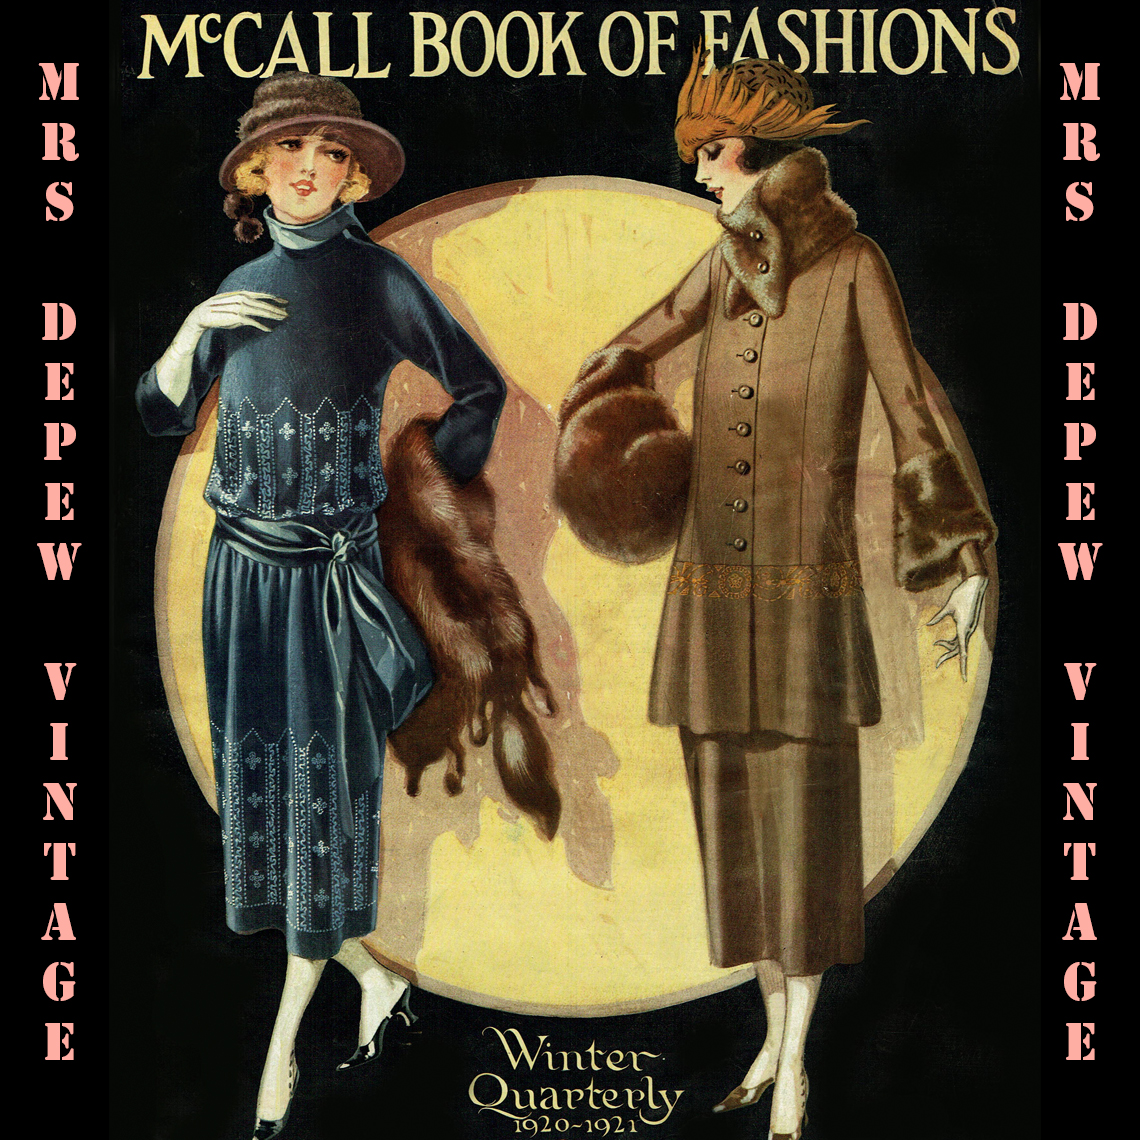 Vintage Sewing Pattern Catalog Booklet Mccall Quarterly Summer 1922 Fashion  E-book INSTANT DOWNLOAD -  Canada